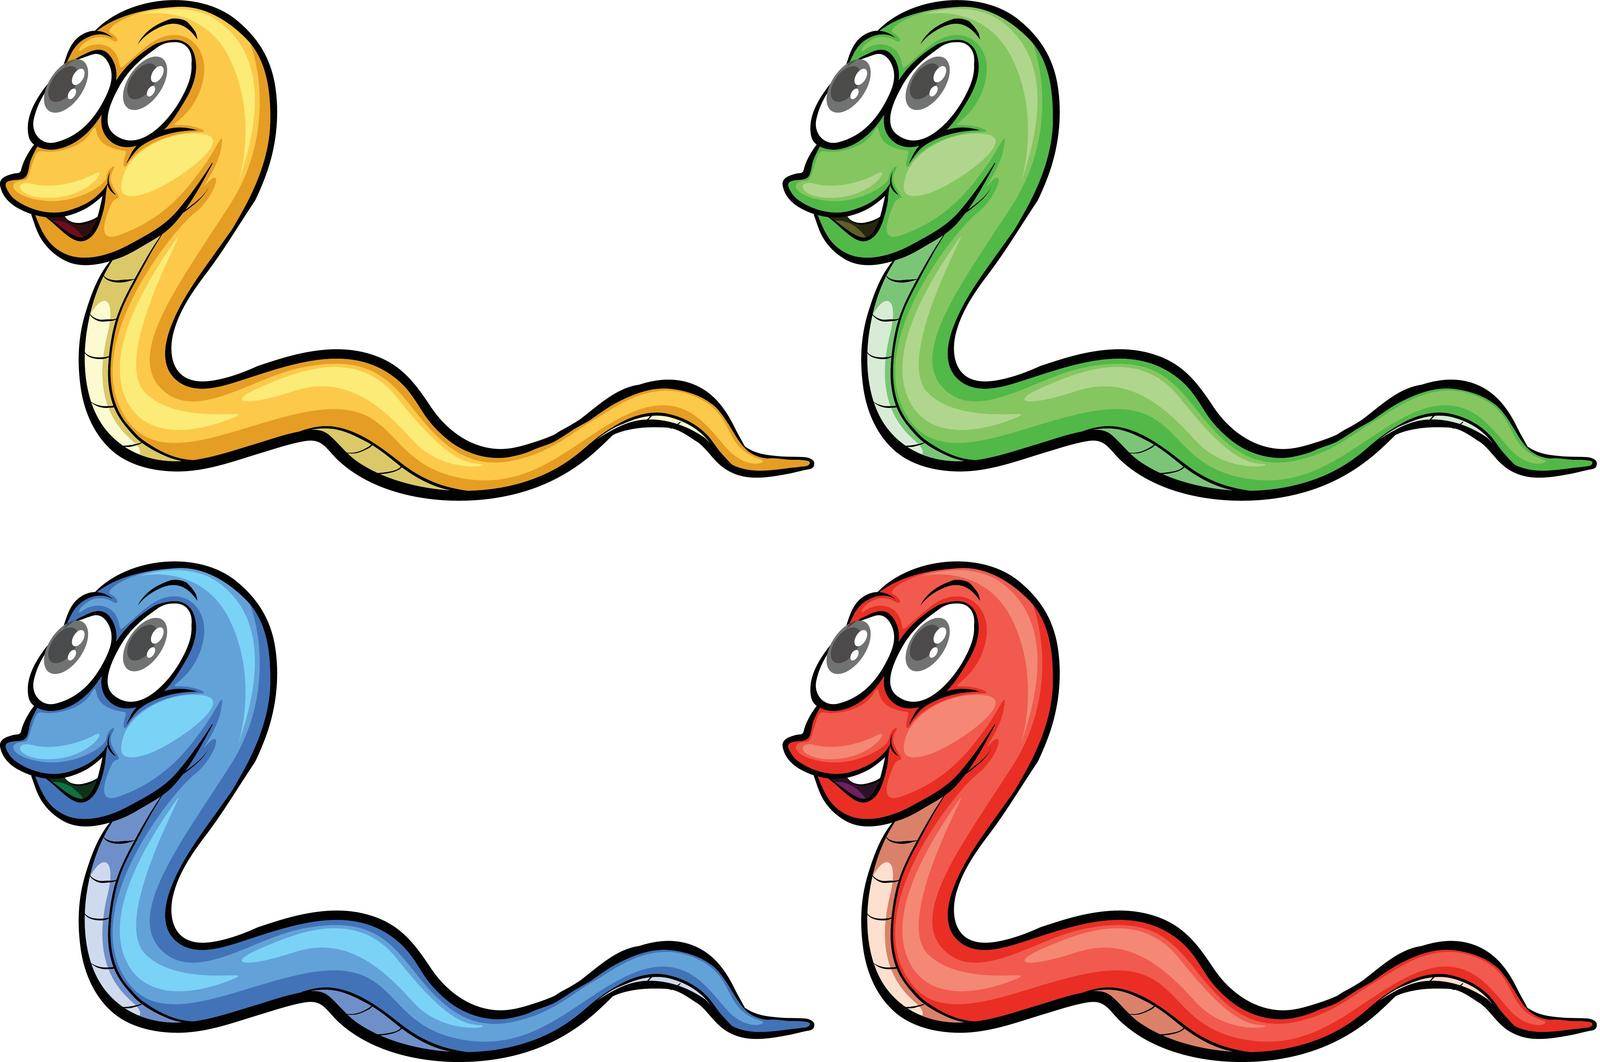 Four snakes colourful on a white background